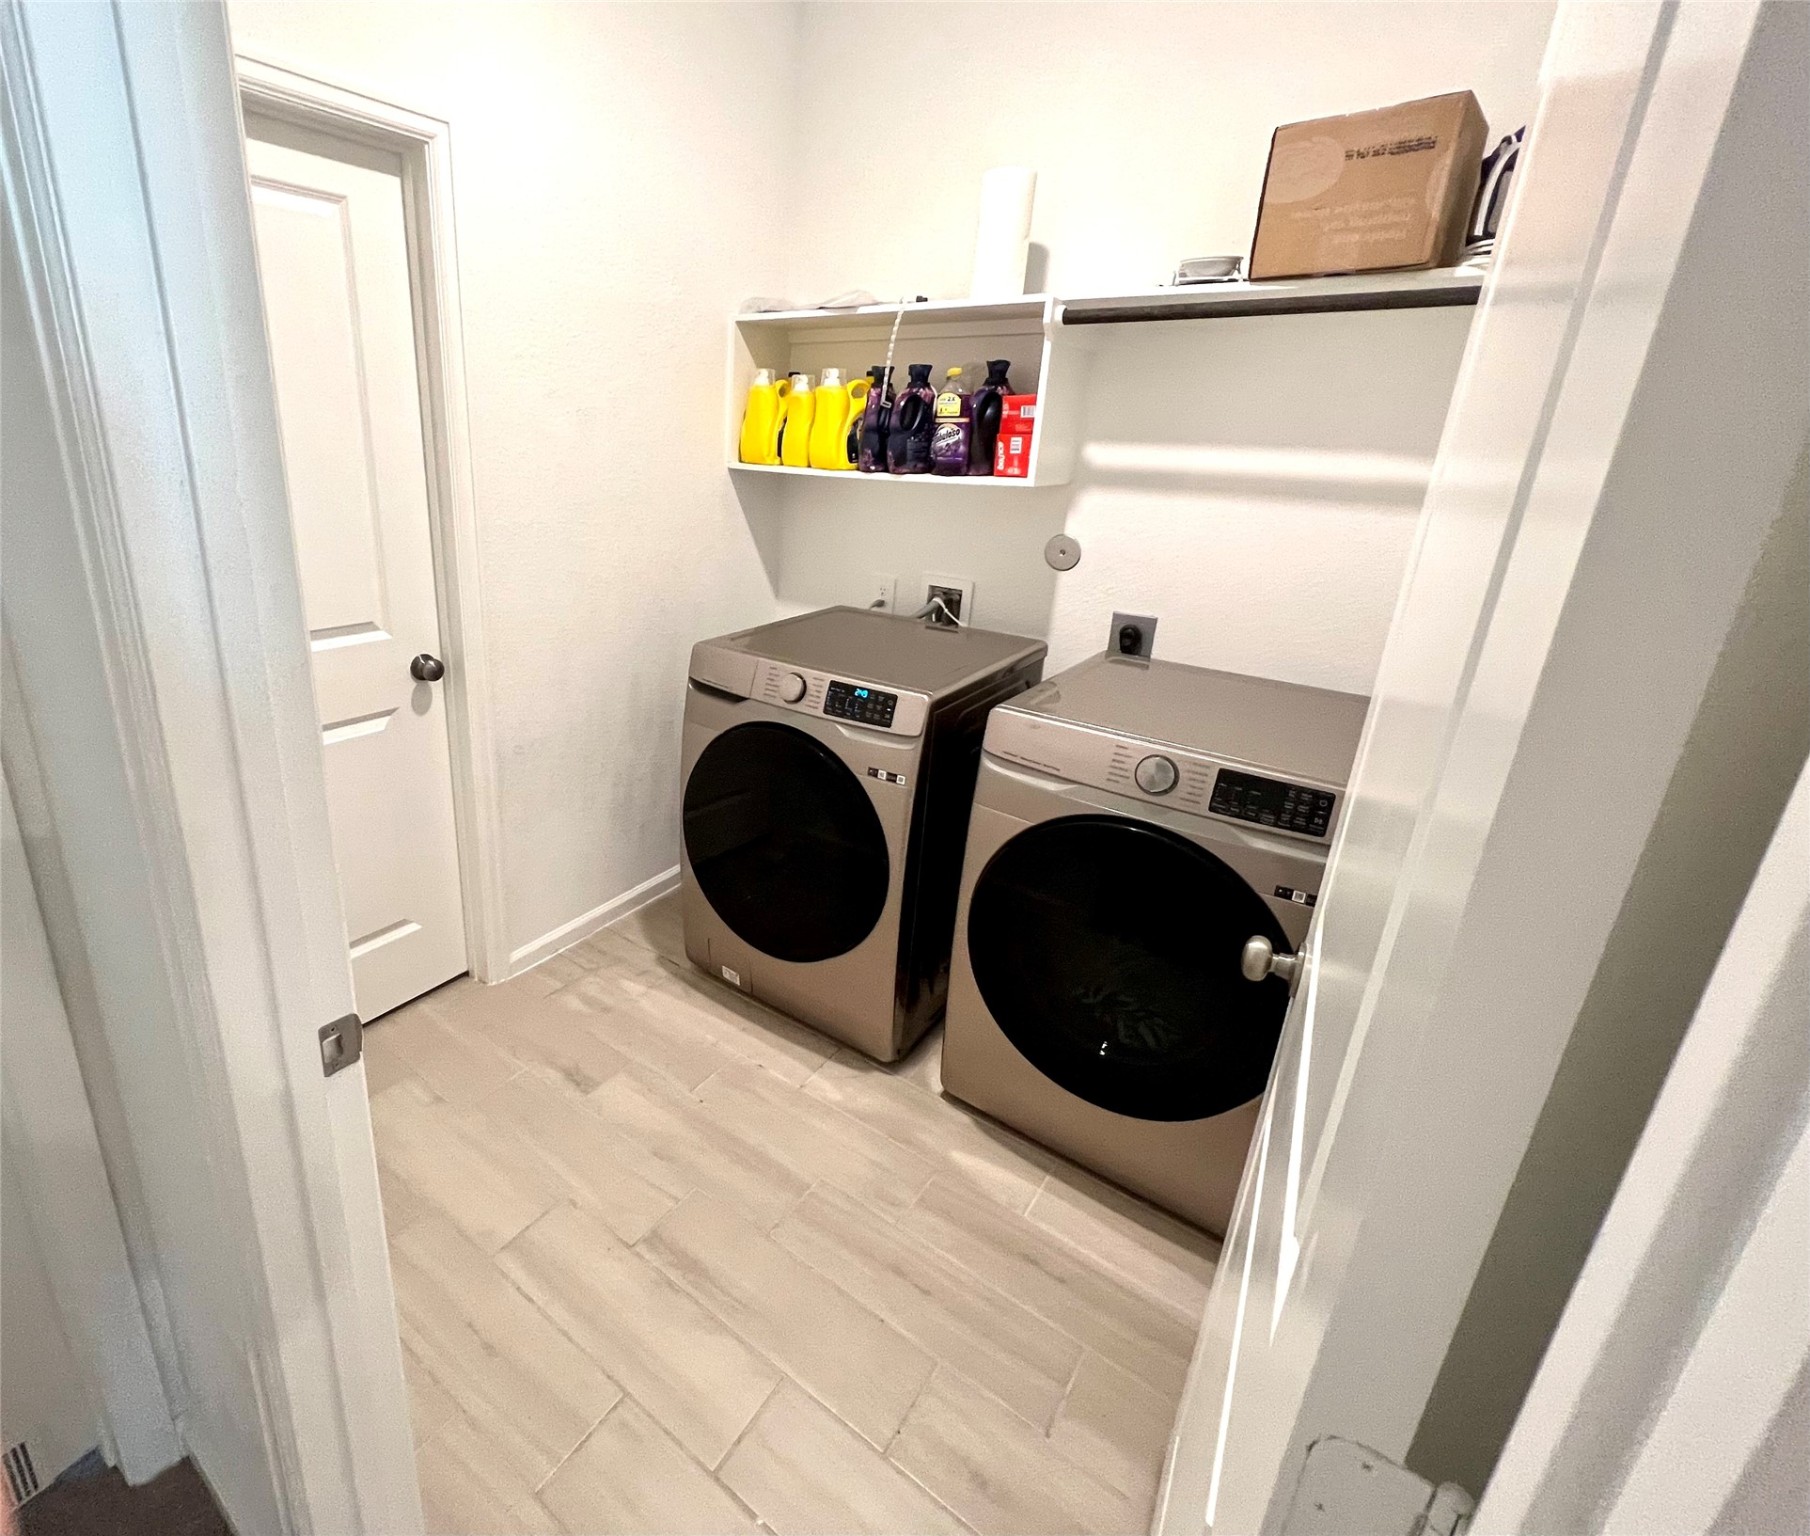 Oversized laundry room has additional storage closet attached.